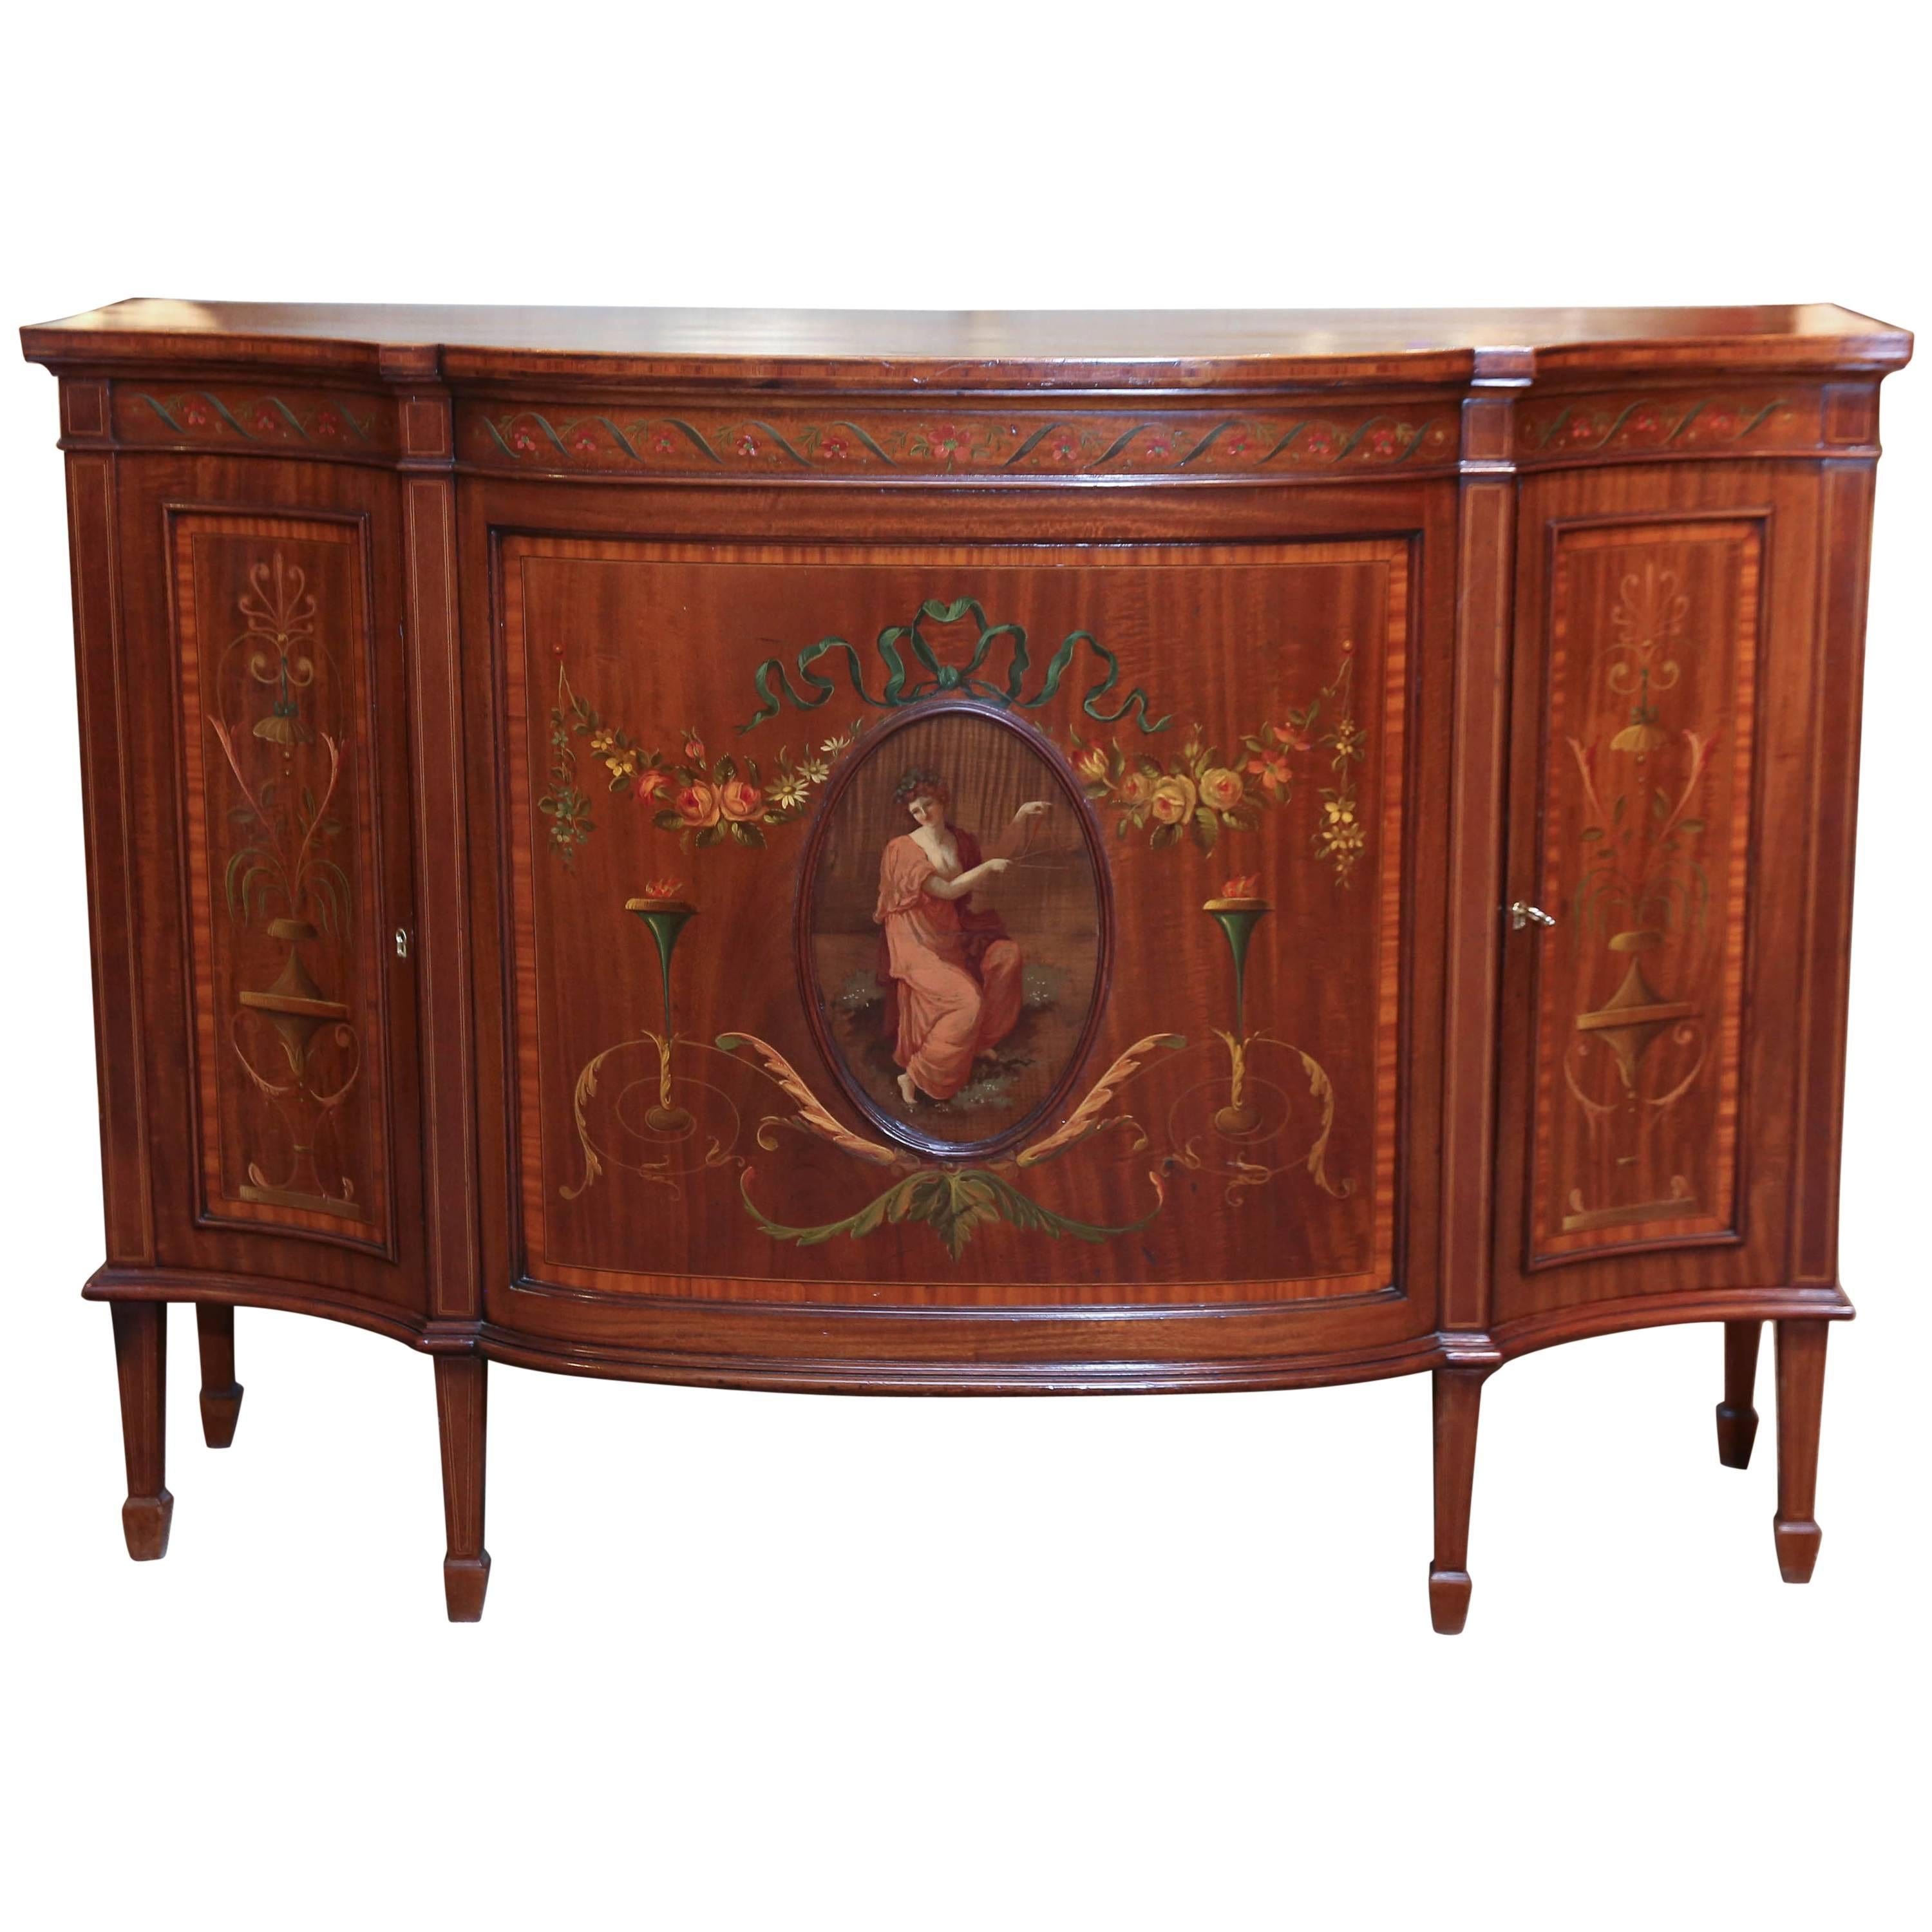 Adams Style Mahogany Cabinet, Hand-Painted with a Muse and Floral Motif